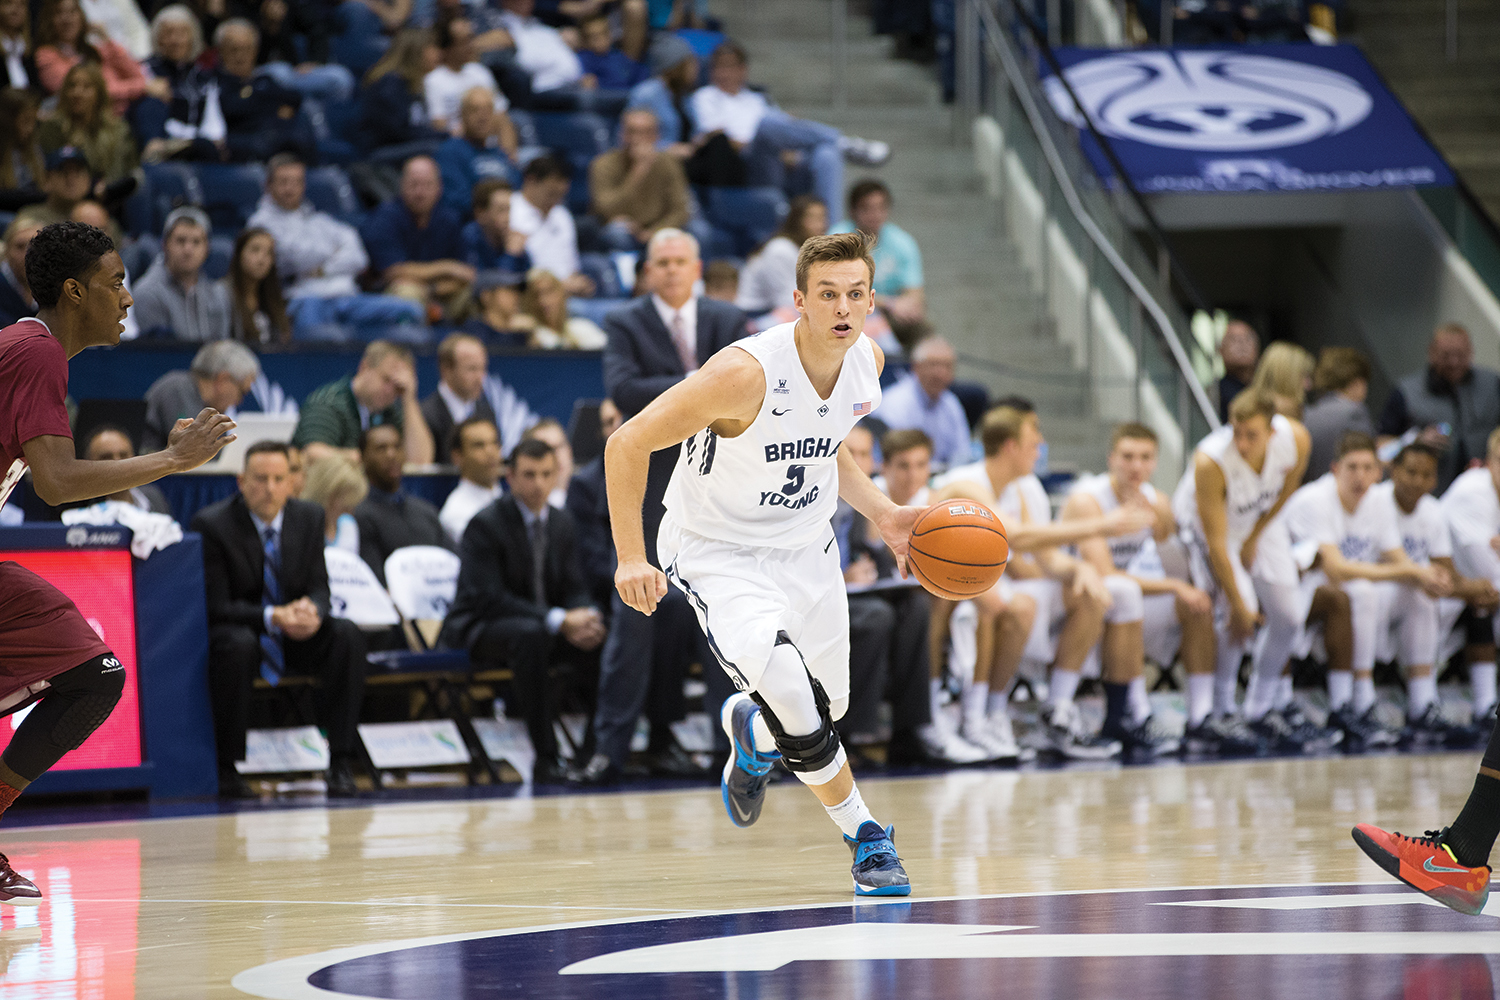 Kyle Collinsworth dribbling forward with the basketball in his hand.